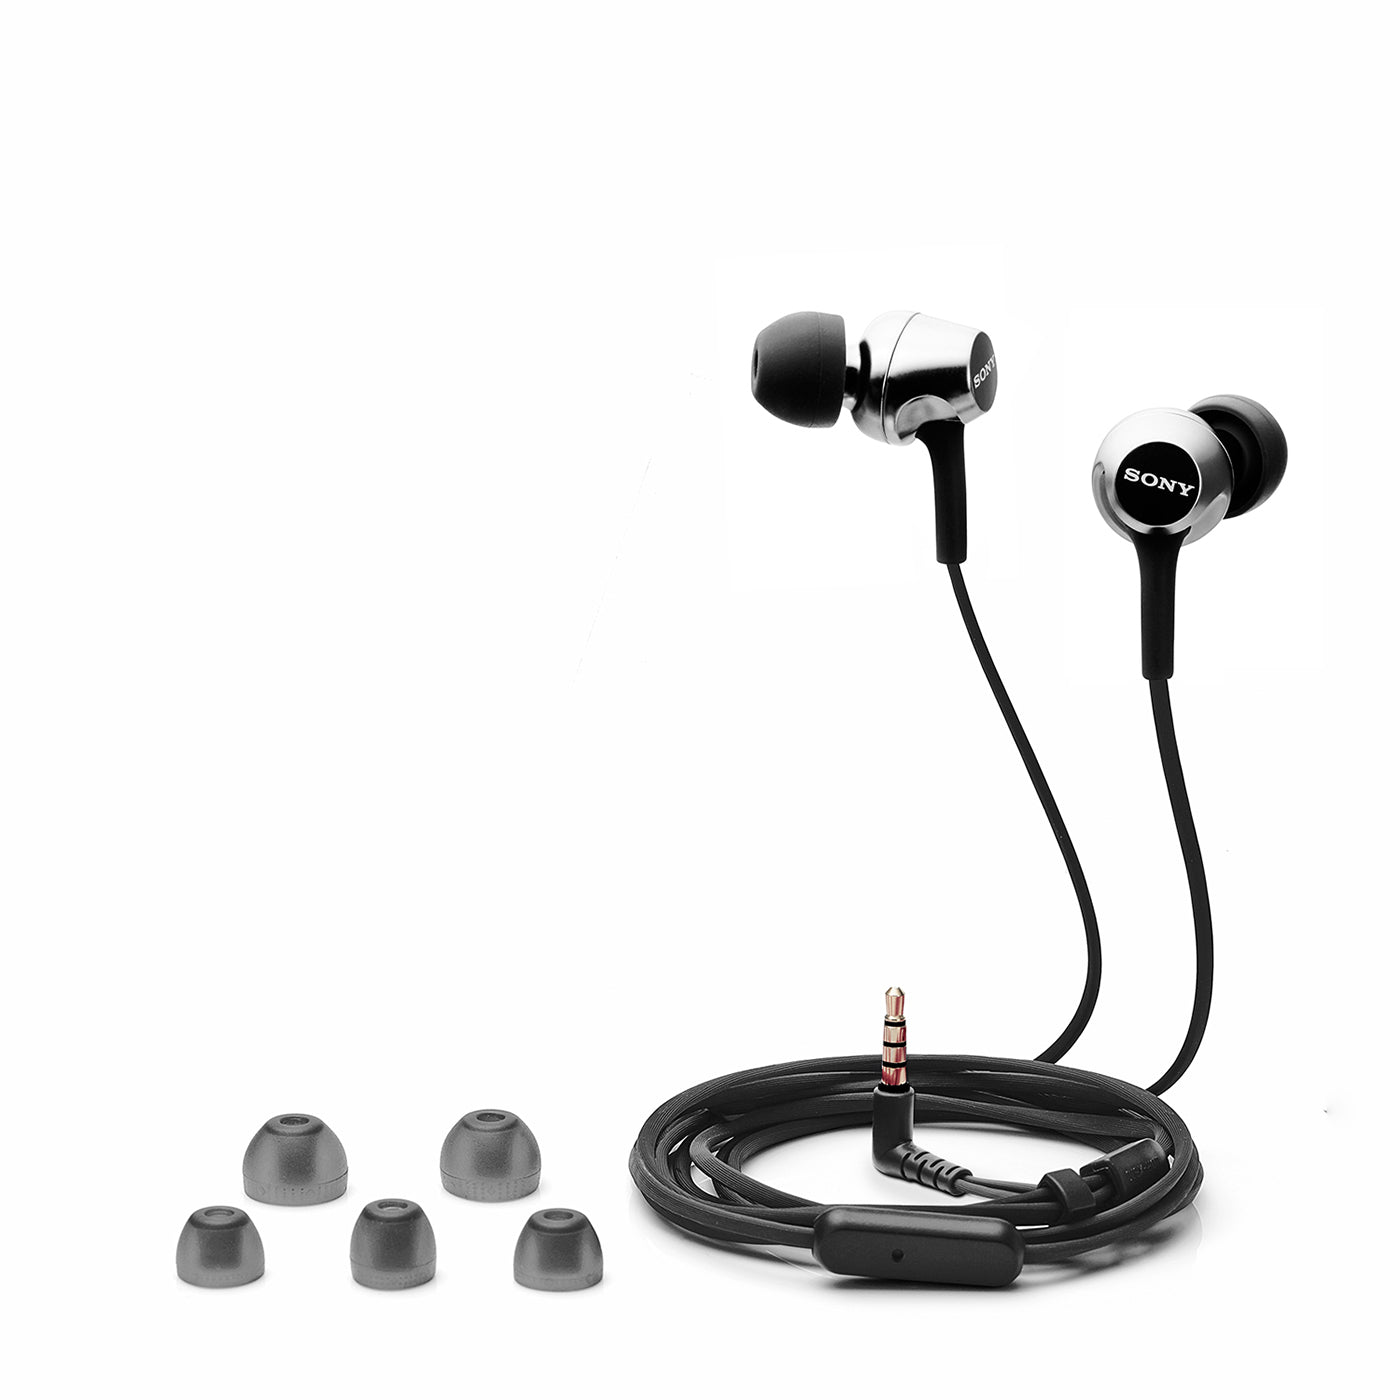 Sony MDR-EX255AP Wired in-Ear Headphones with Tangle Free Cable, Headset with Mic for Phone Calls